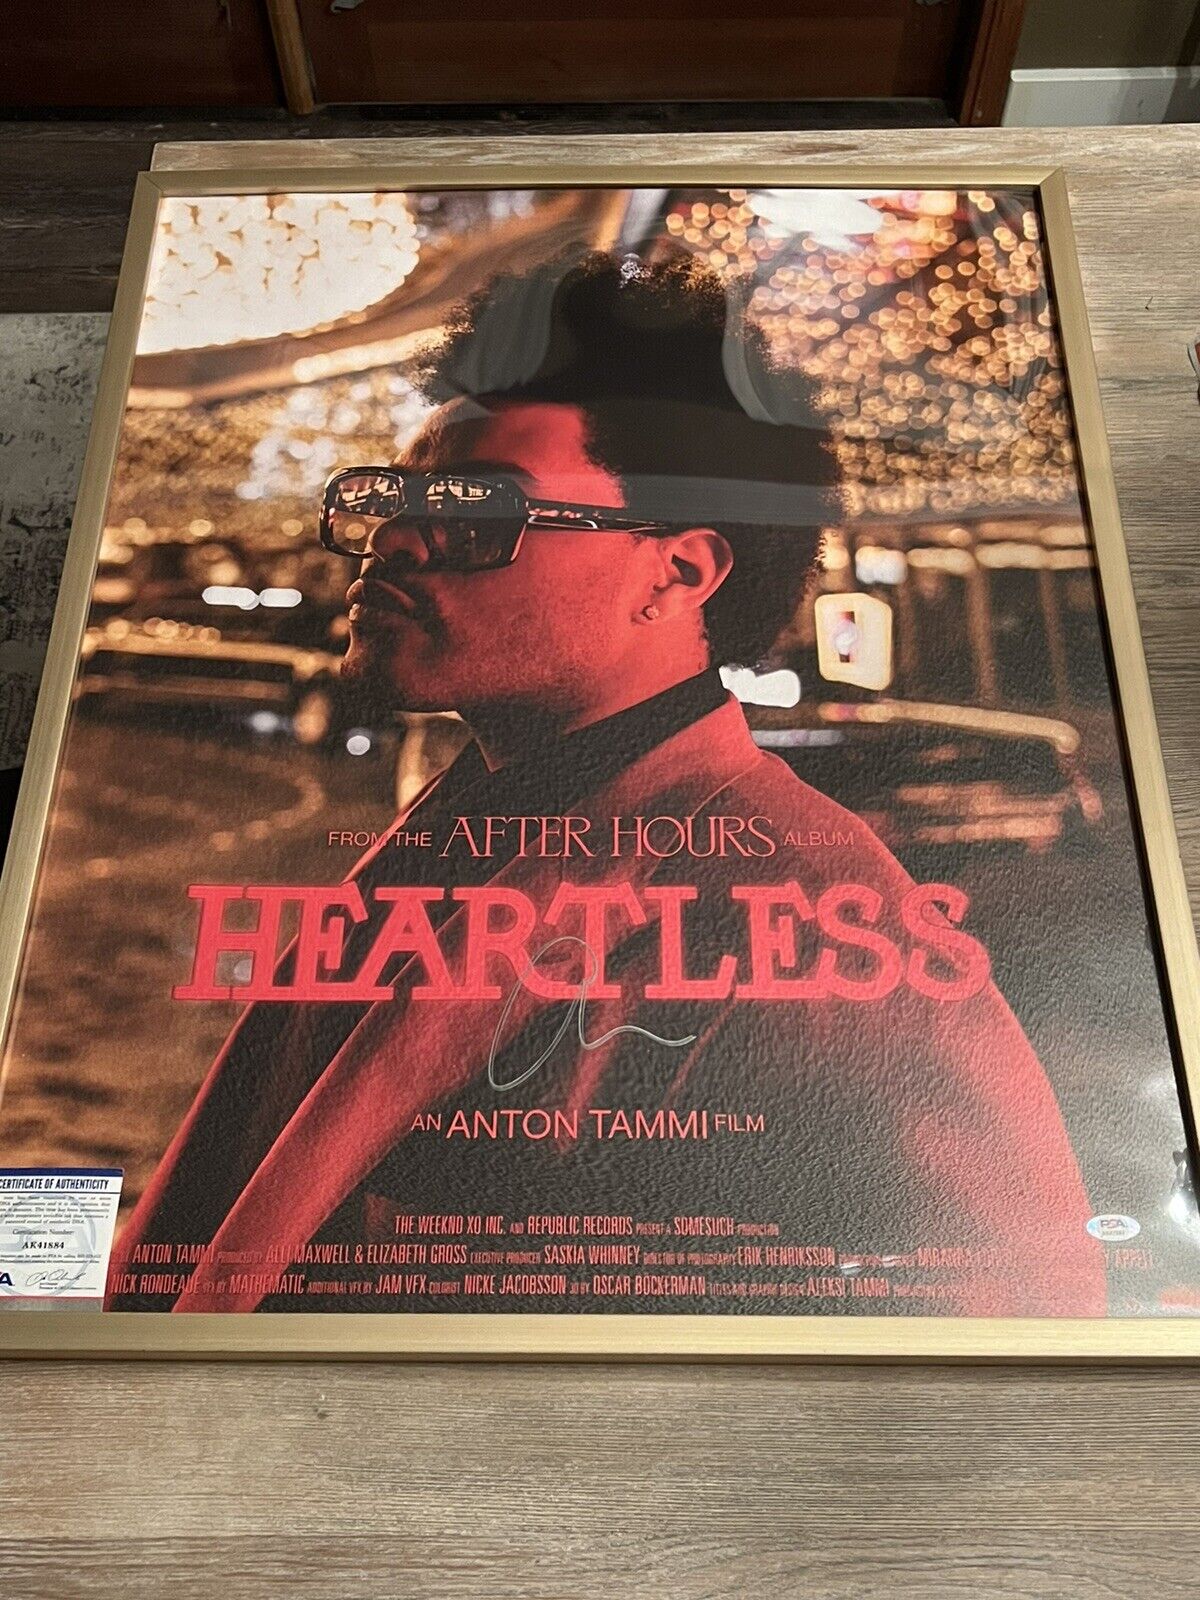 Autograph The Weeknd Heartless Photo Film Poster Signed and Framed PSA DNA COA